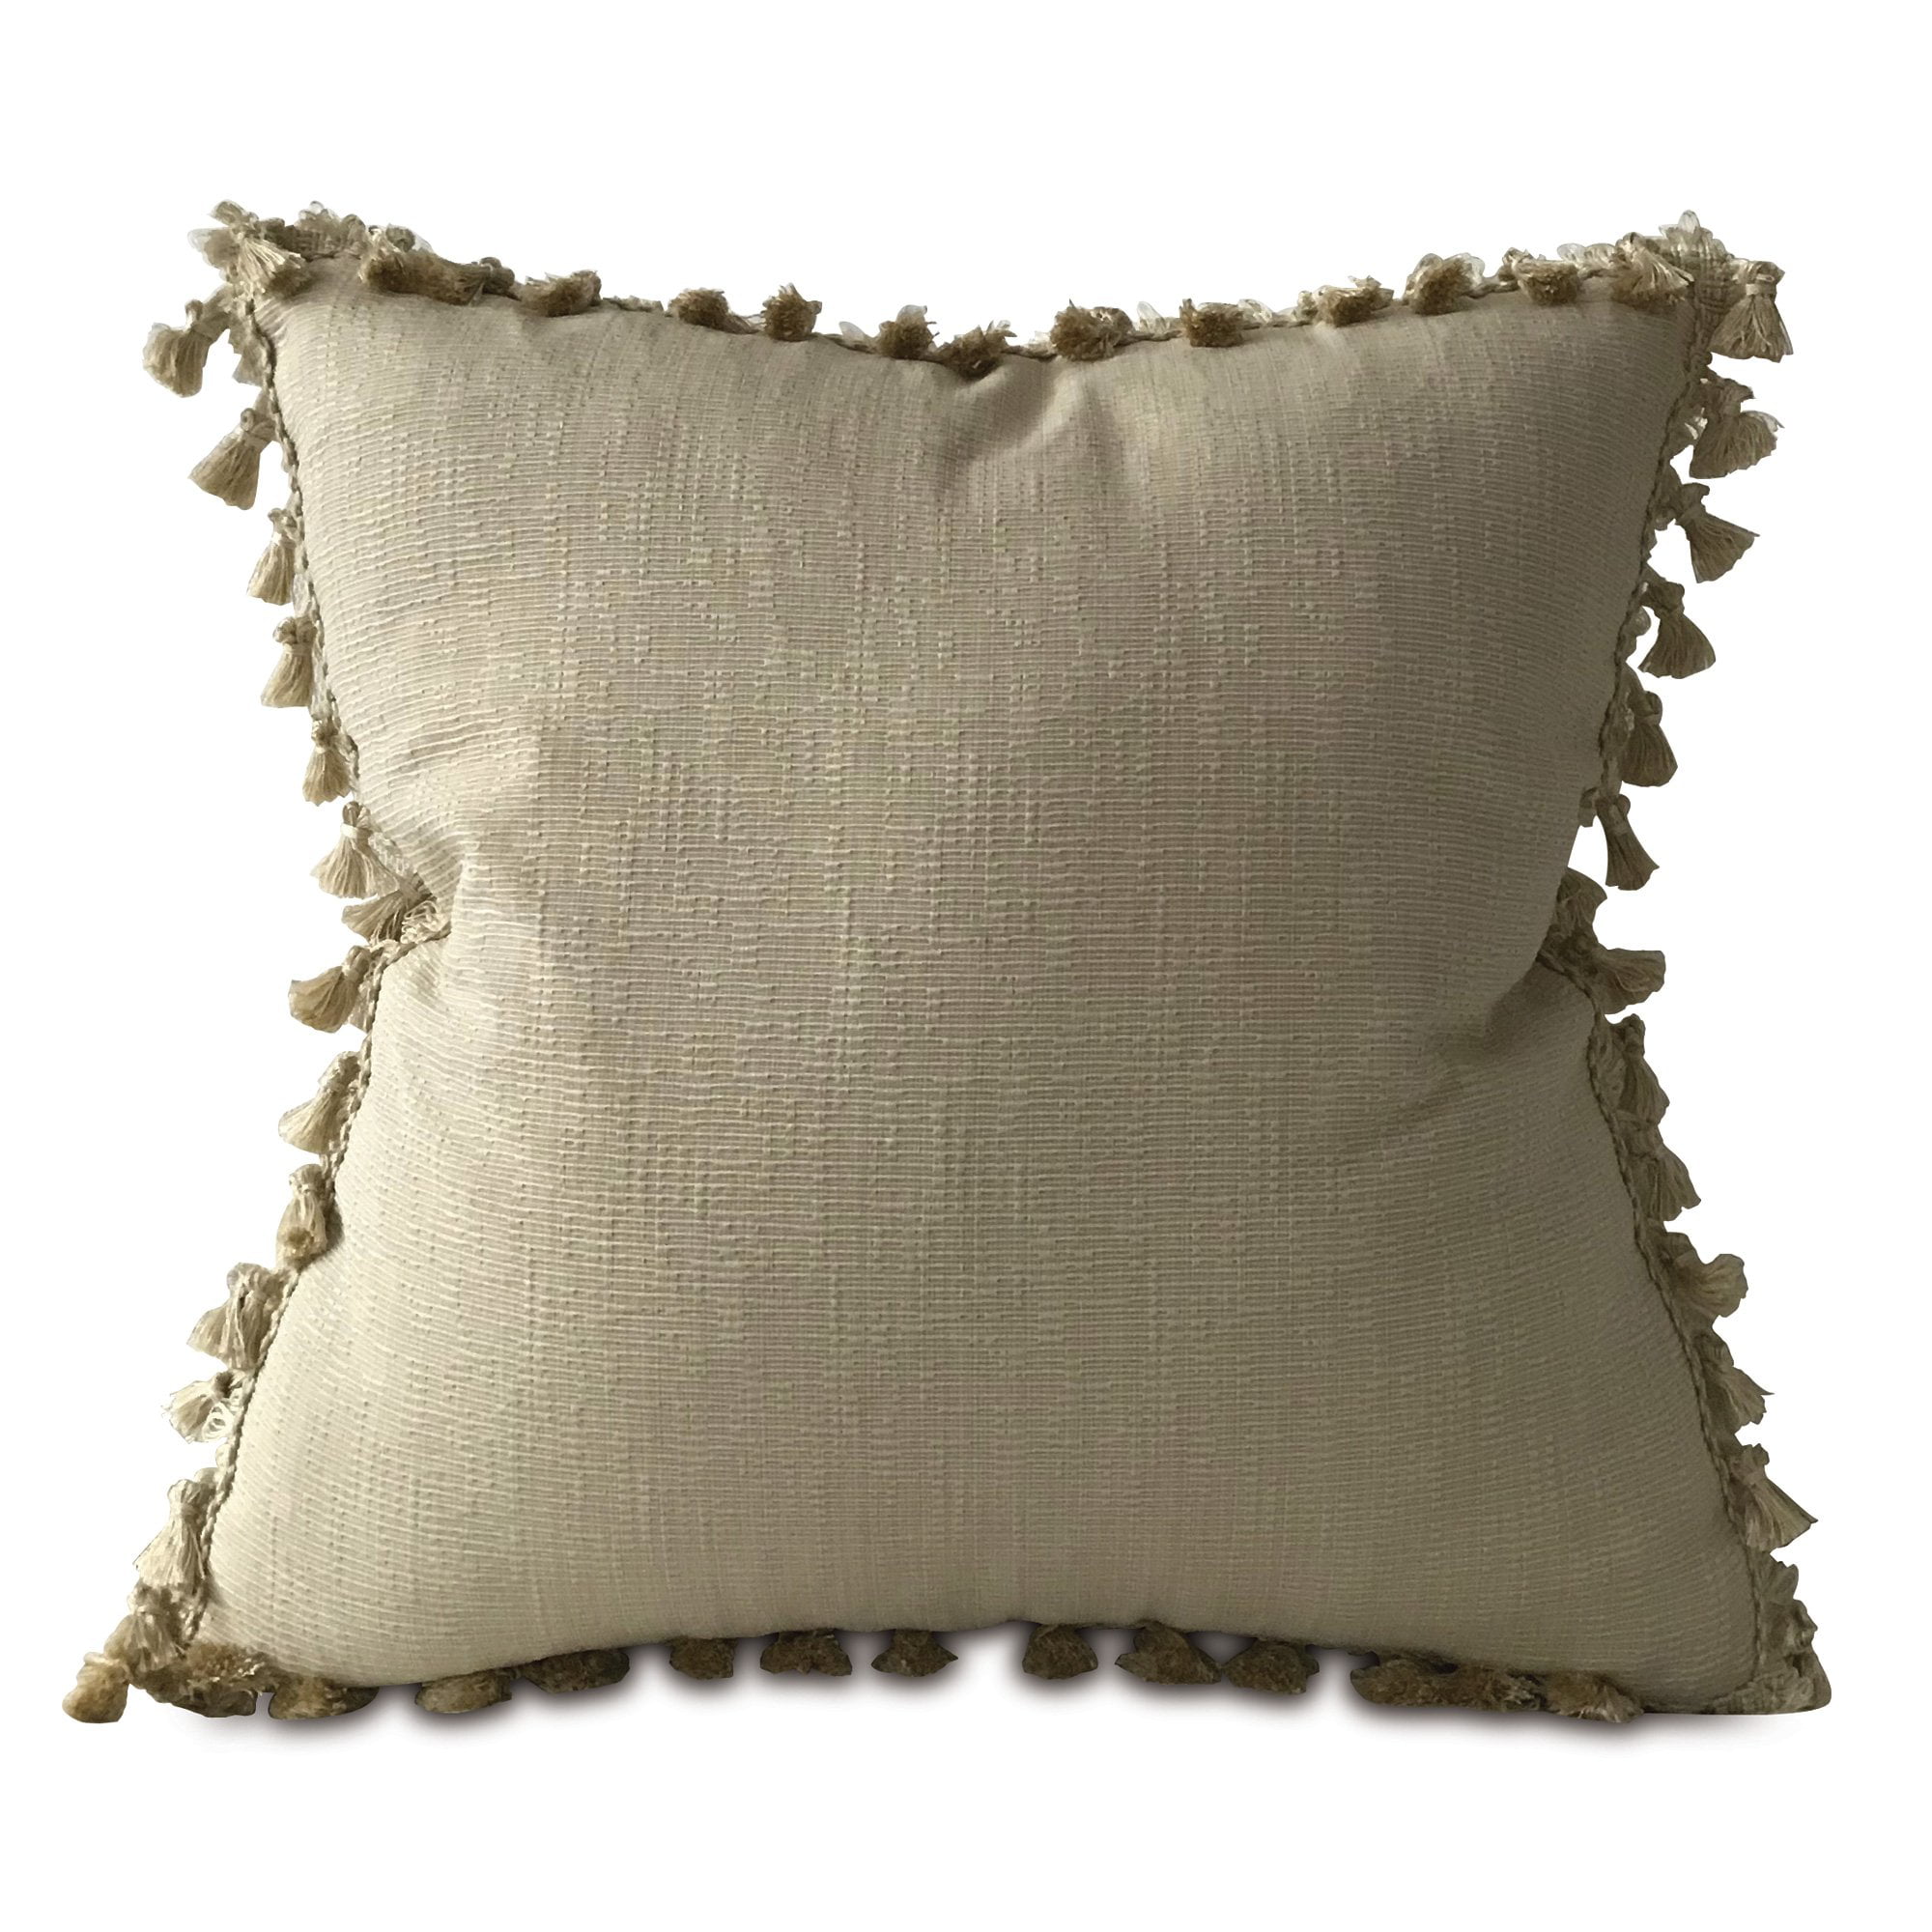 Taupe Textured Throw Pillow Cover with Tassel Trim 22